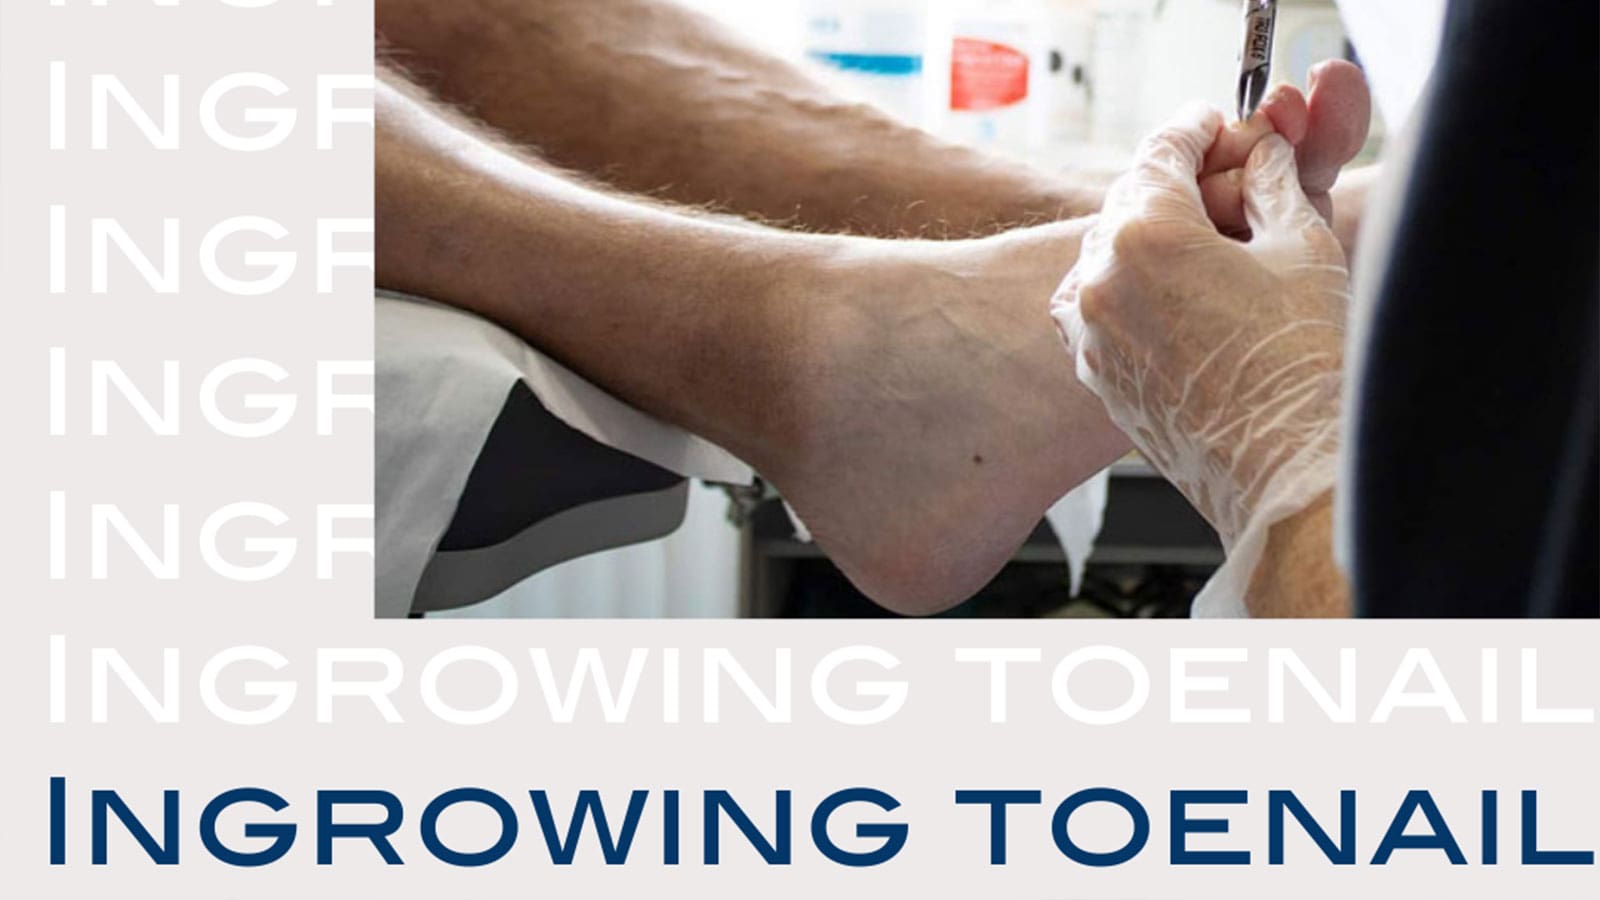 Now Is The Time For Ingrowing Toenail Surgery | The Nantwich Clinic | Health Care & Self Care | Nantwich | Cheshire